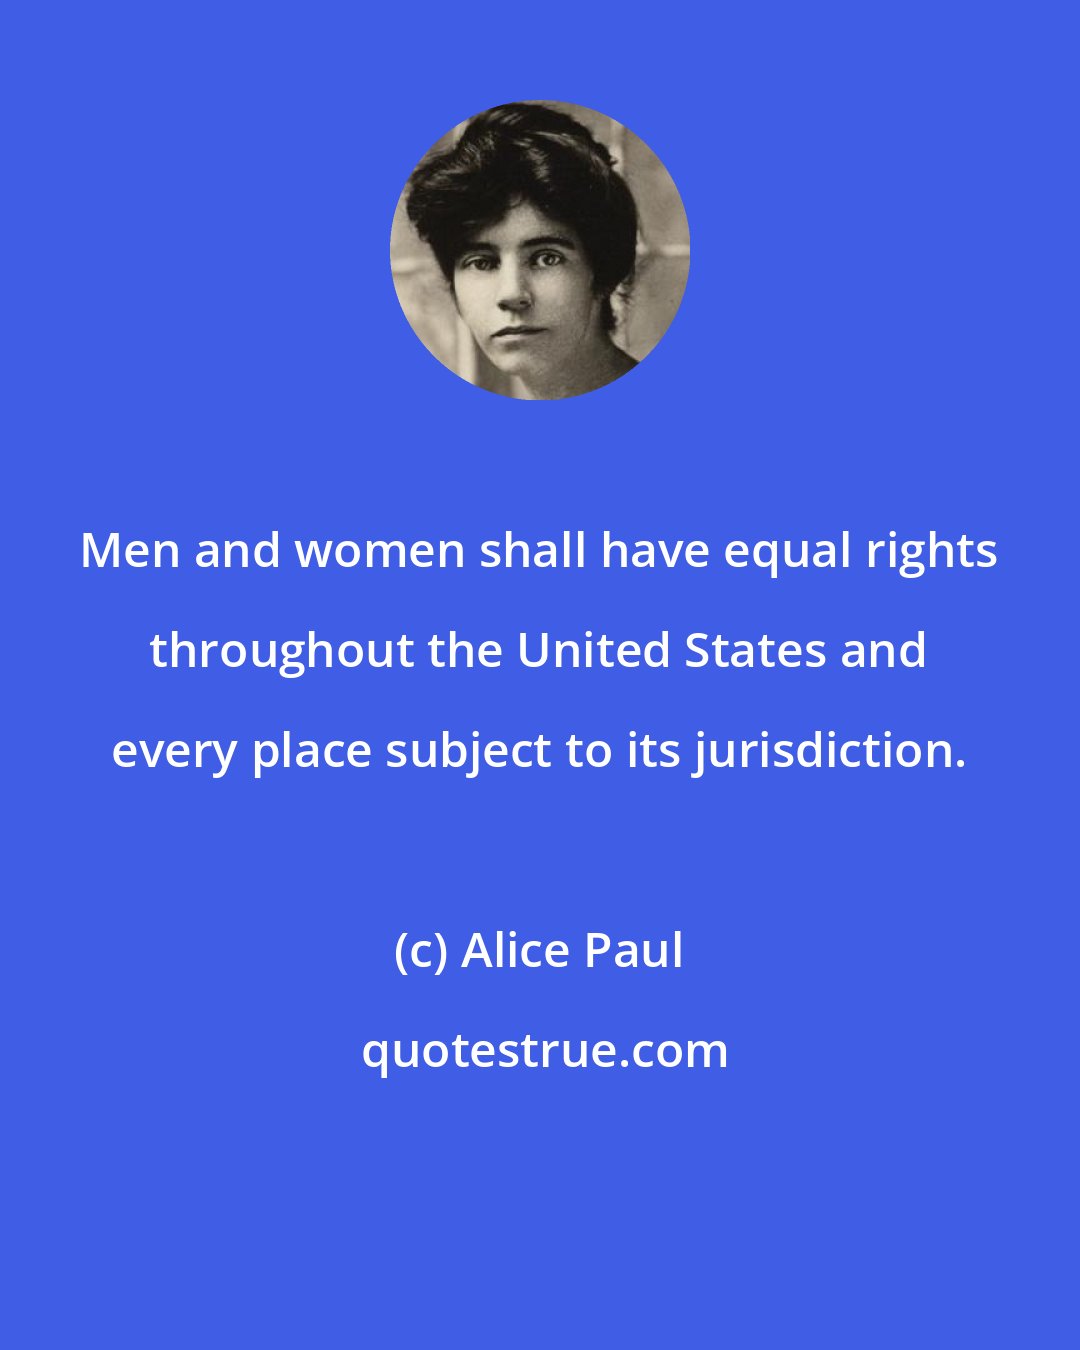 Alice Paul: Men and women shall have equal rights throughout the United States and every place subject to its jurisdiction.